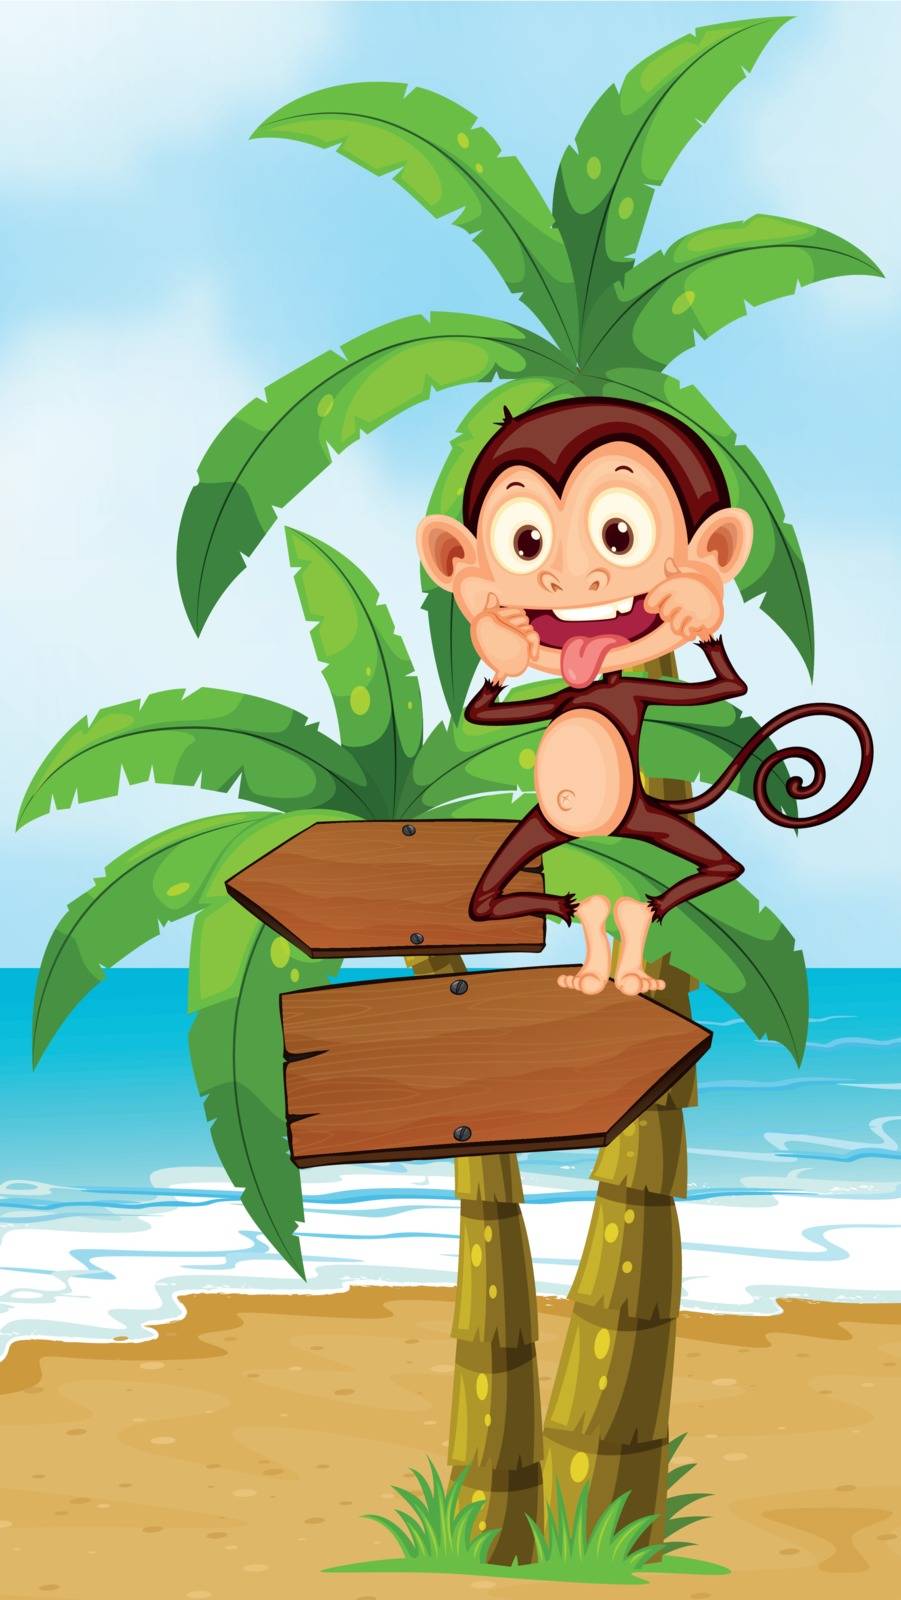 Illustration of a playful monkey above the wooden arrowboard at the beach